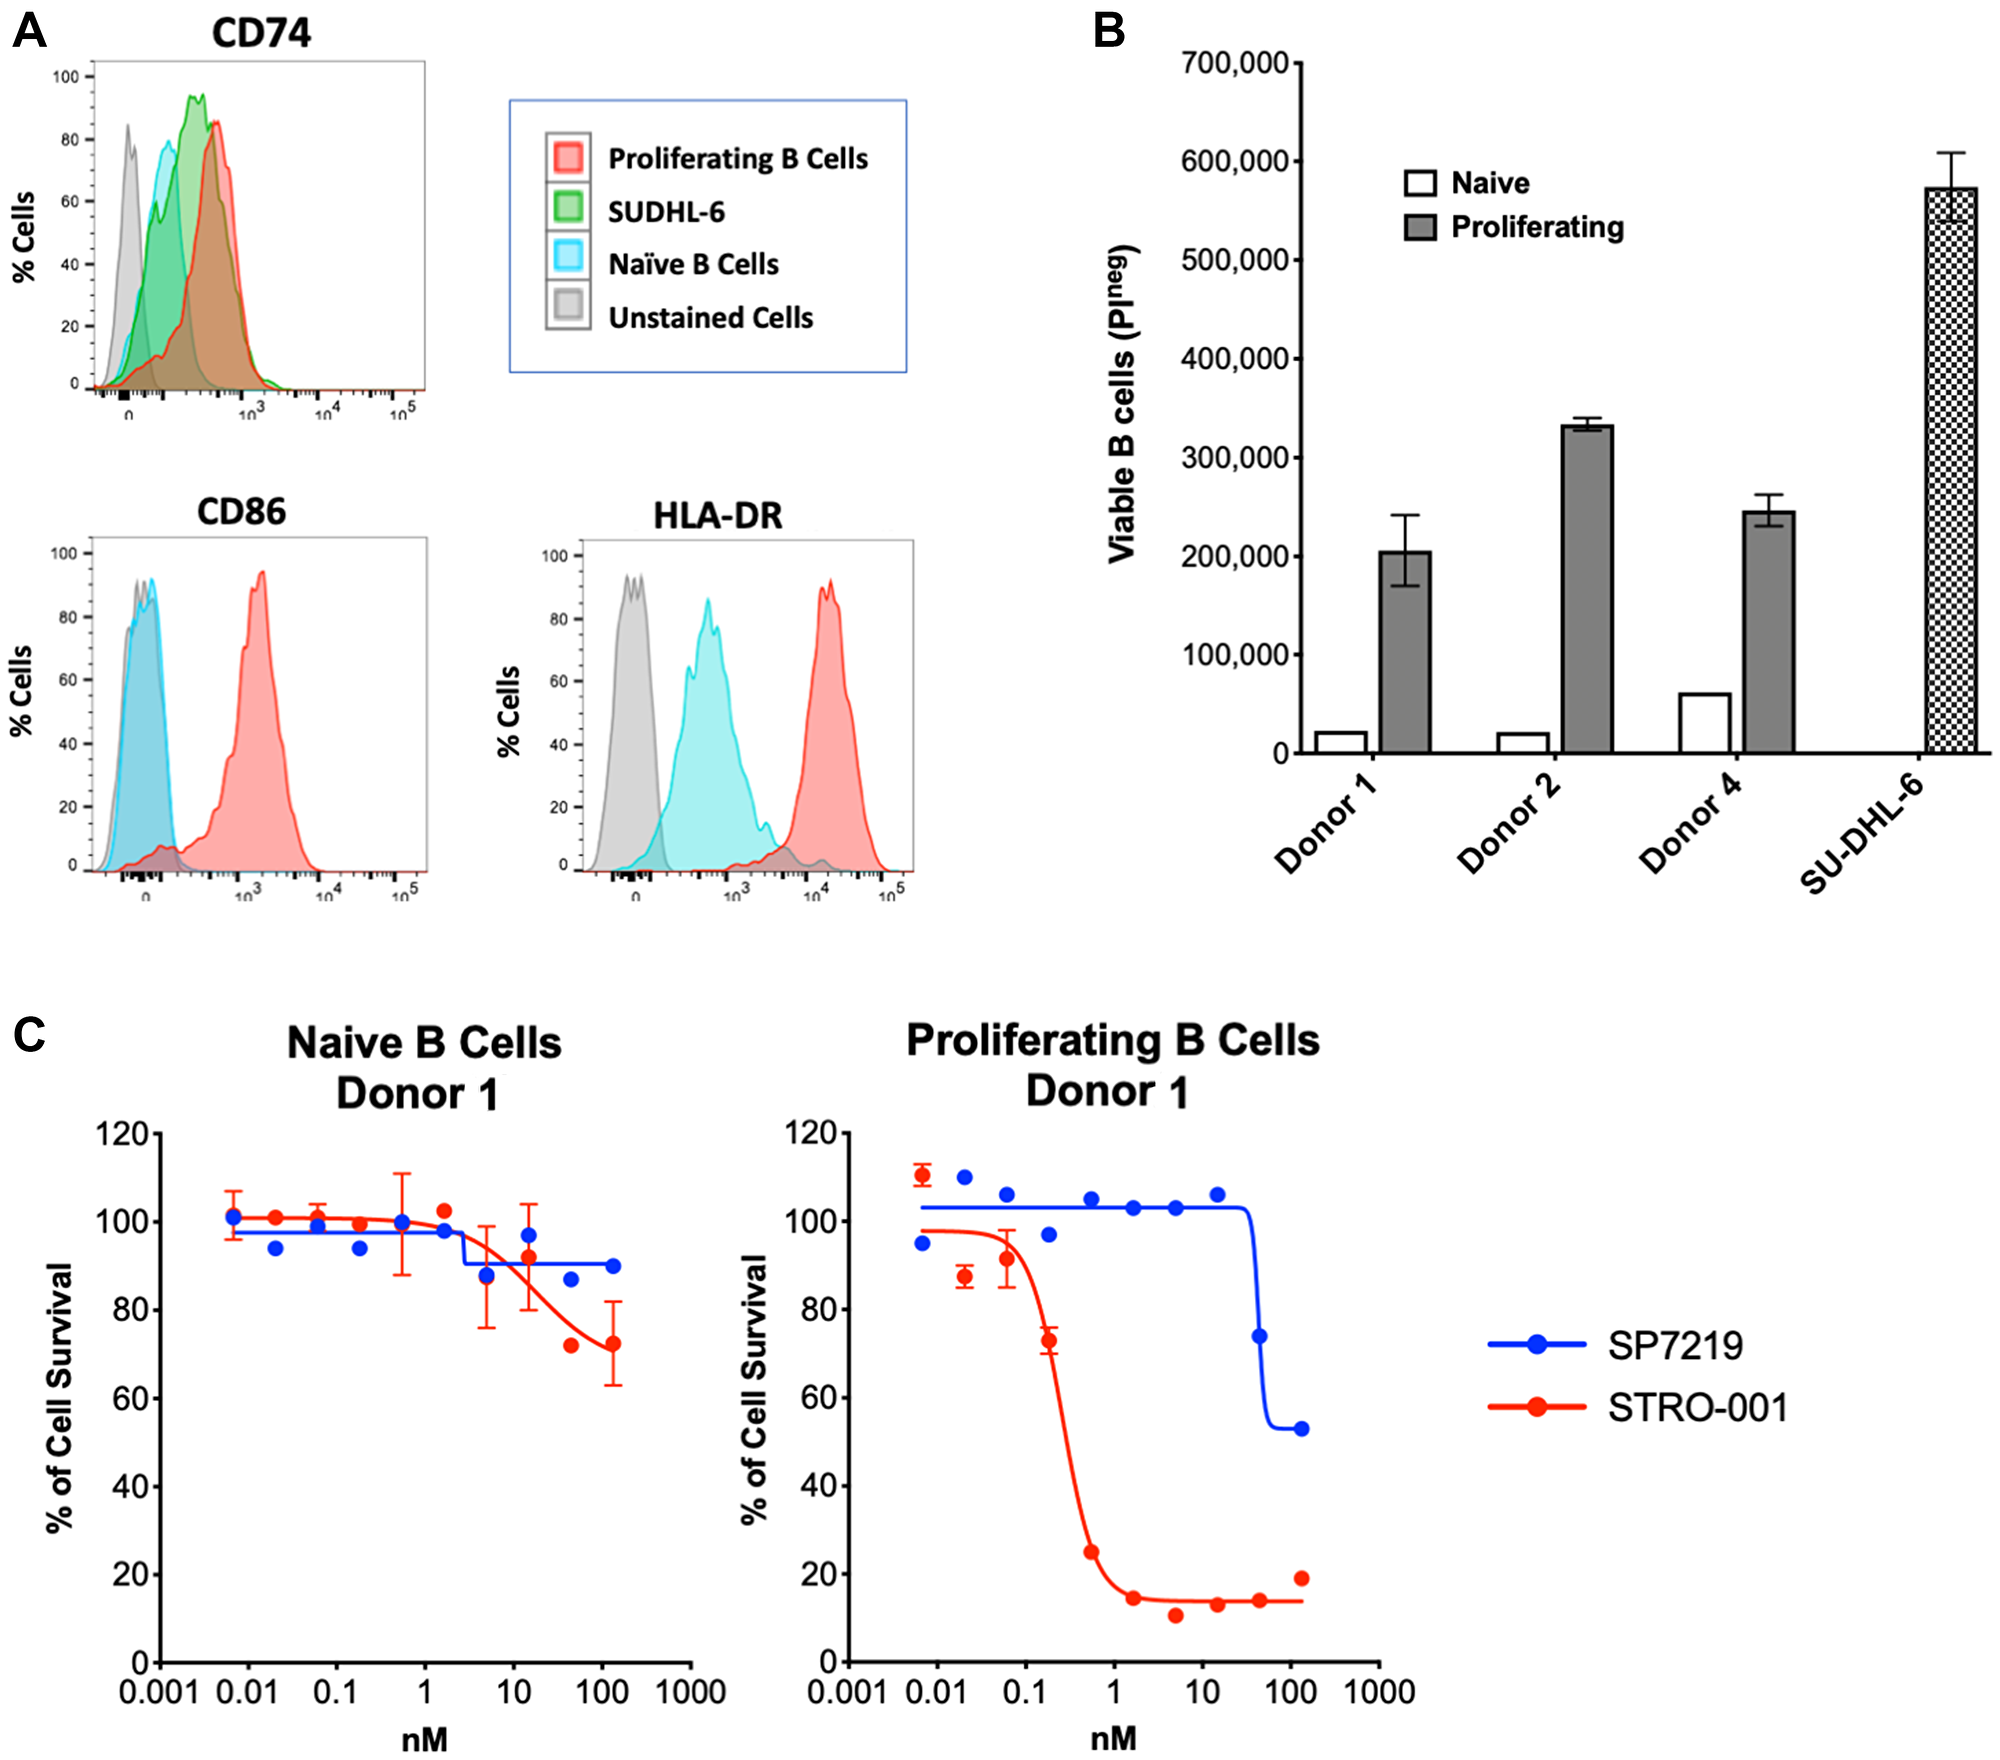 STRO-001 showed potent cell killing activity on proliferating primary human B cells.